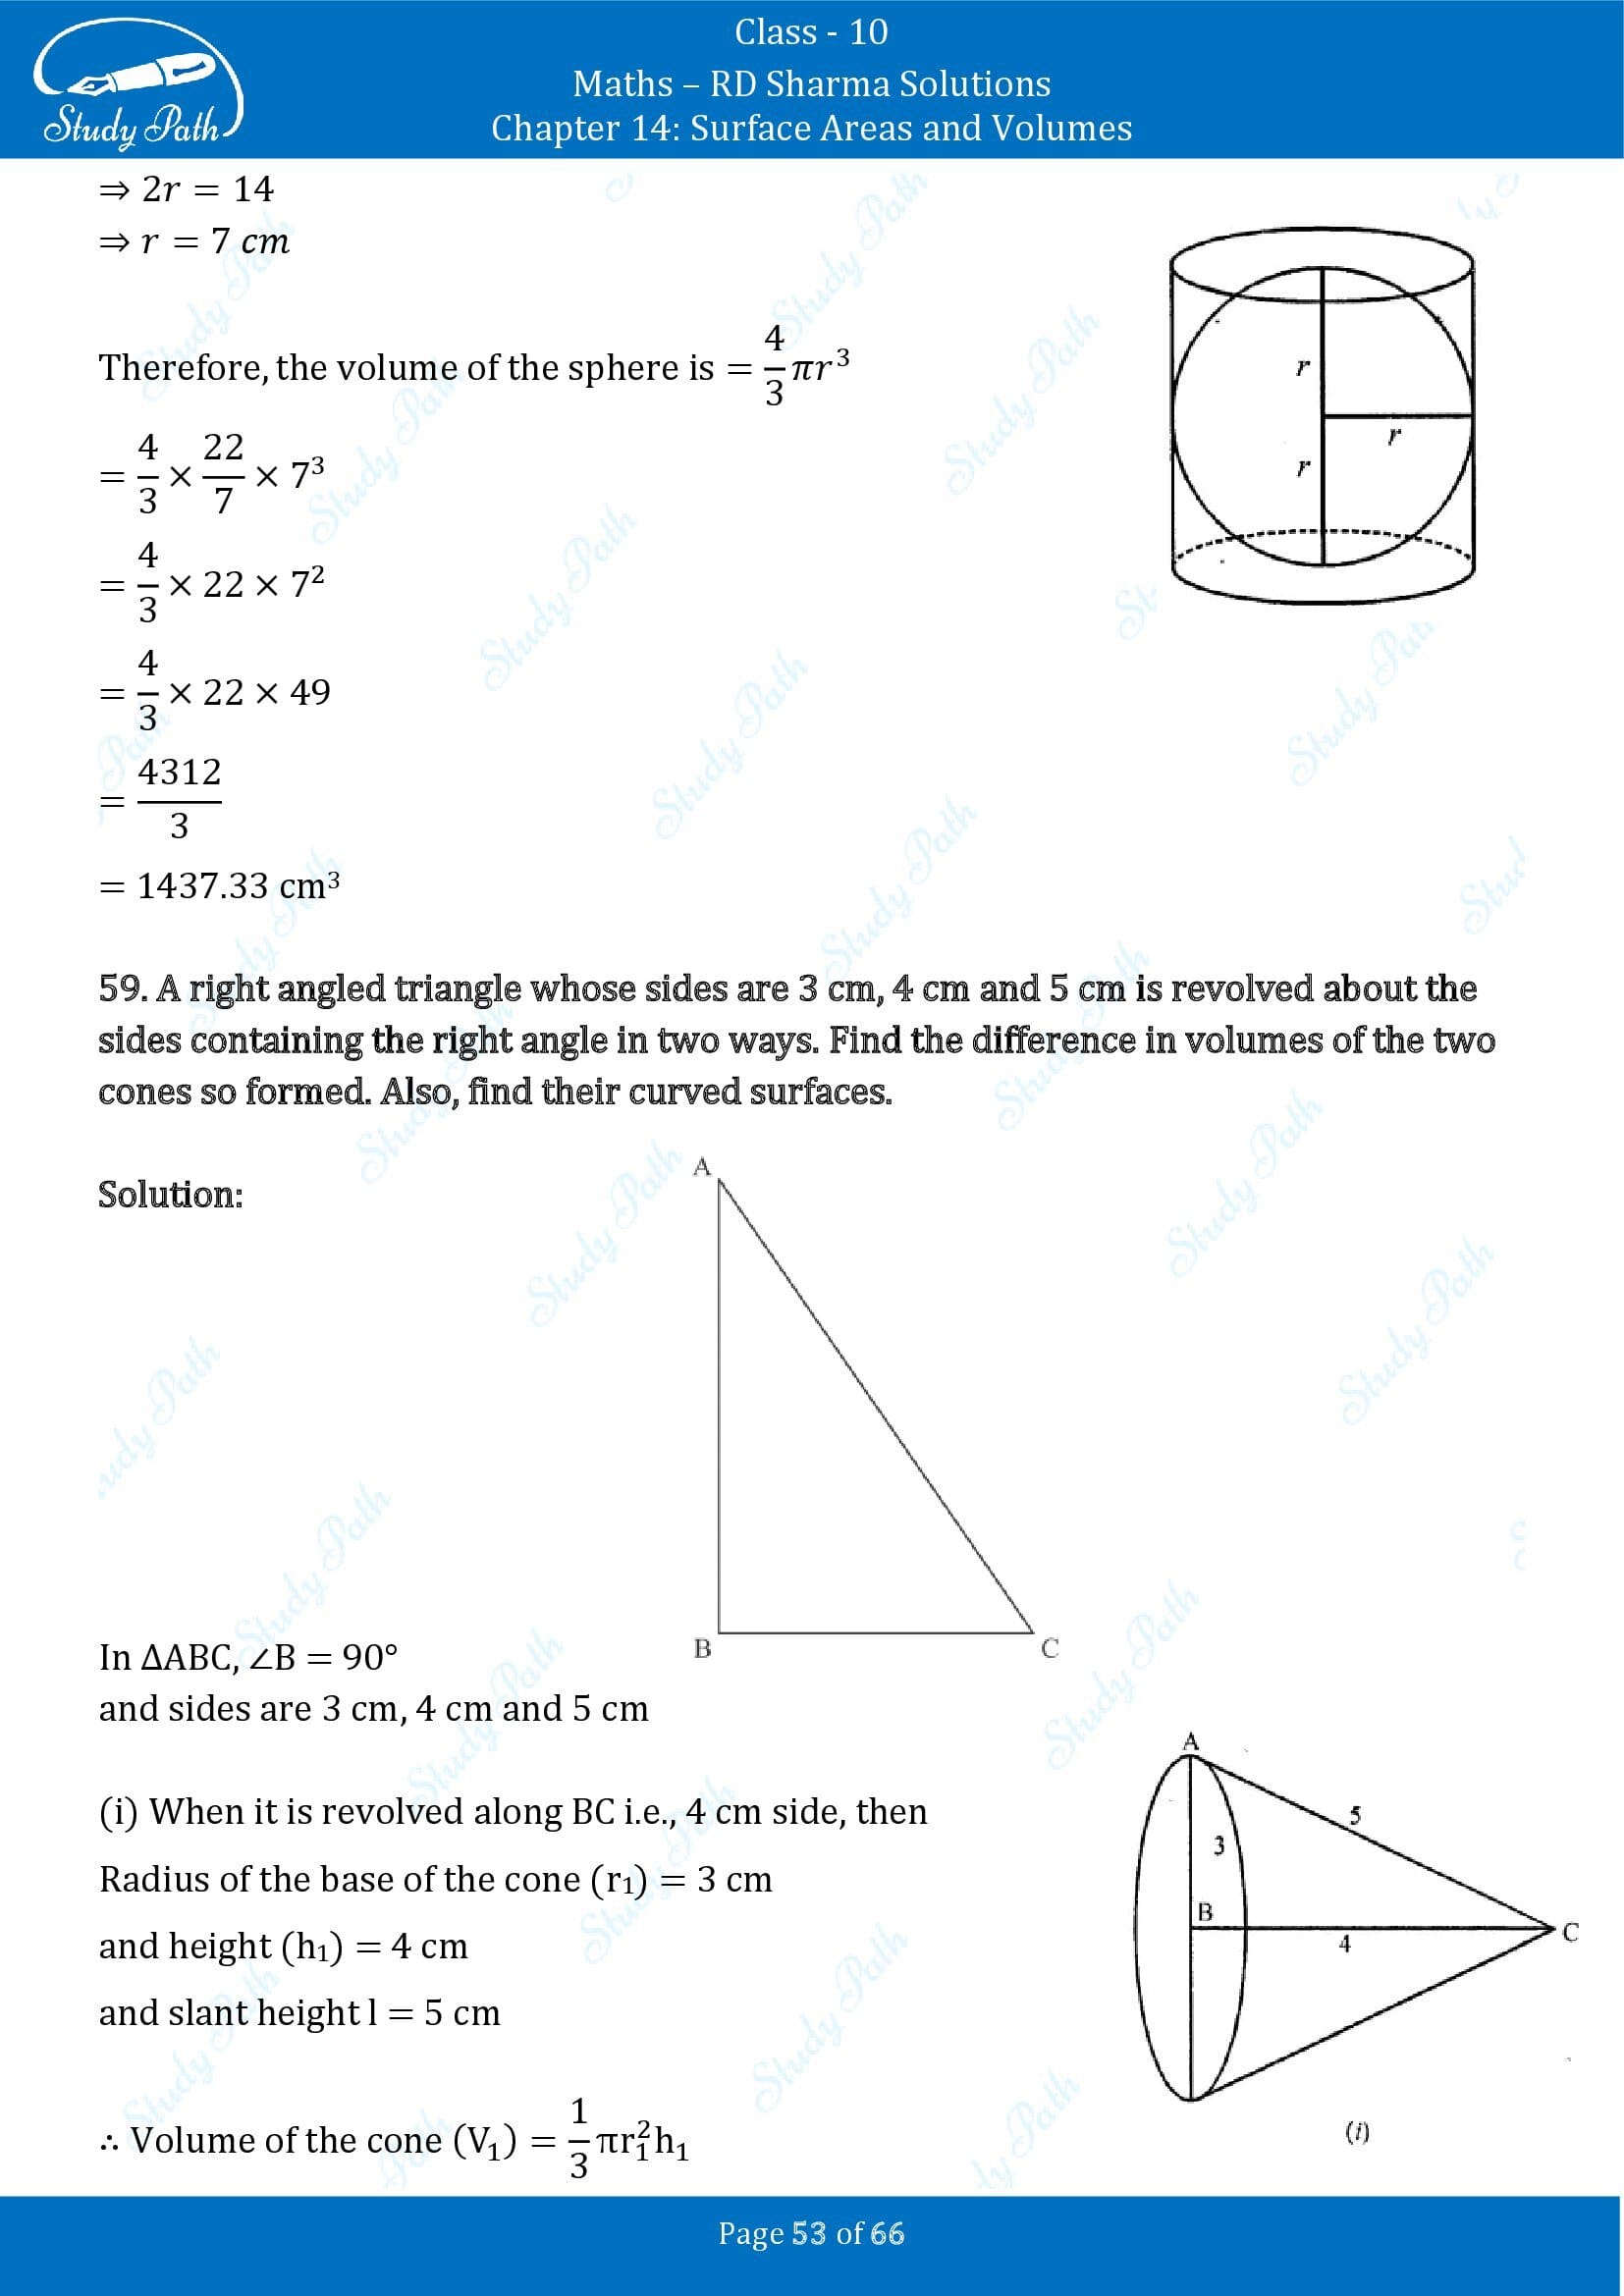 RD Sharma Solutions Class 10 Chapter 14 Surface Areas and Volumes Exercise 14.1 00053